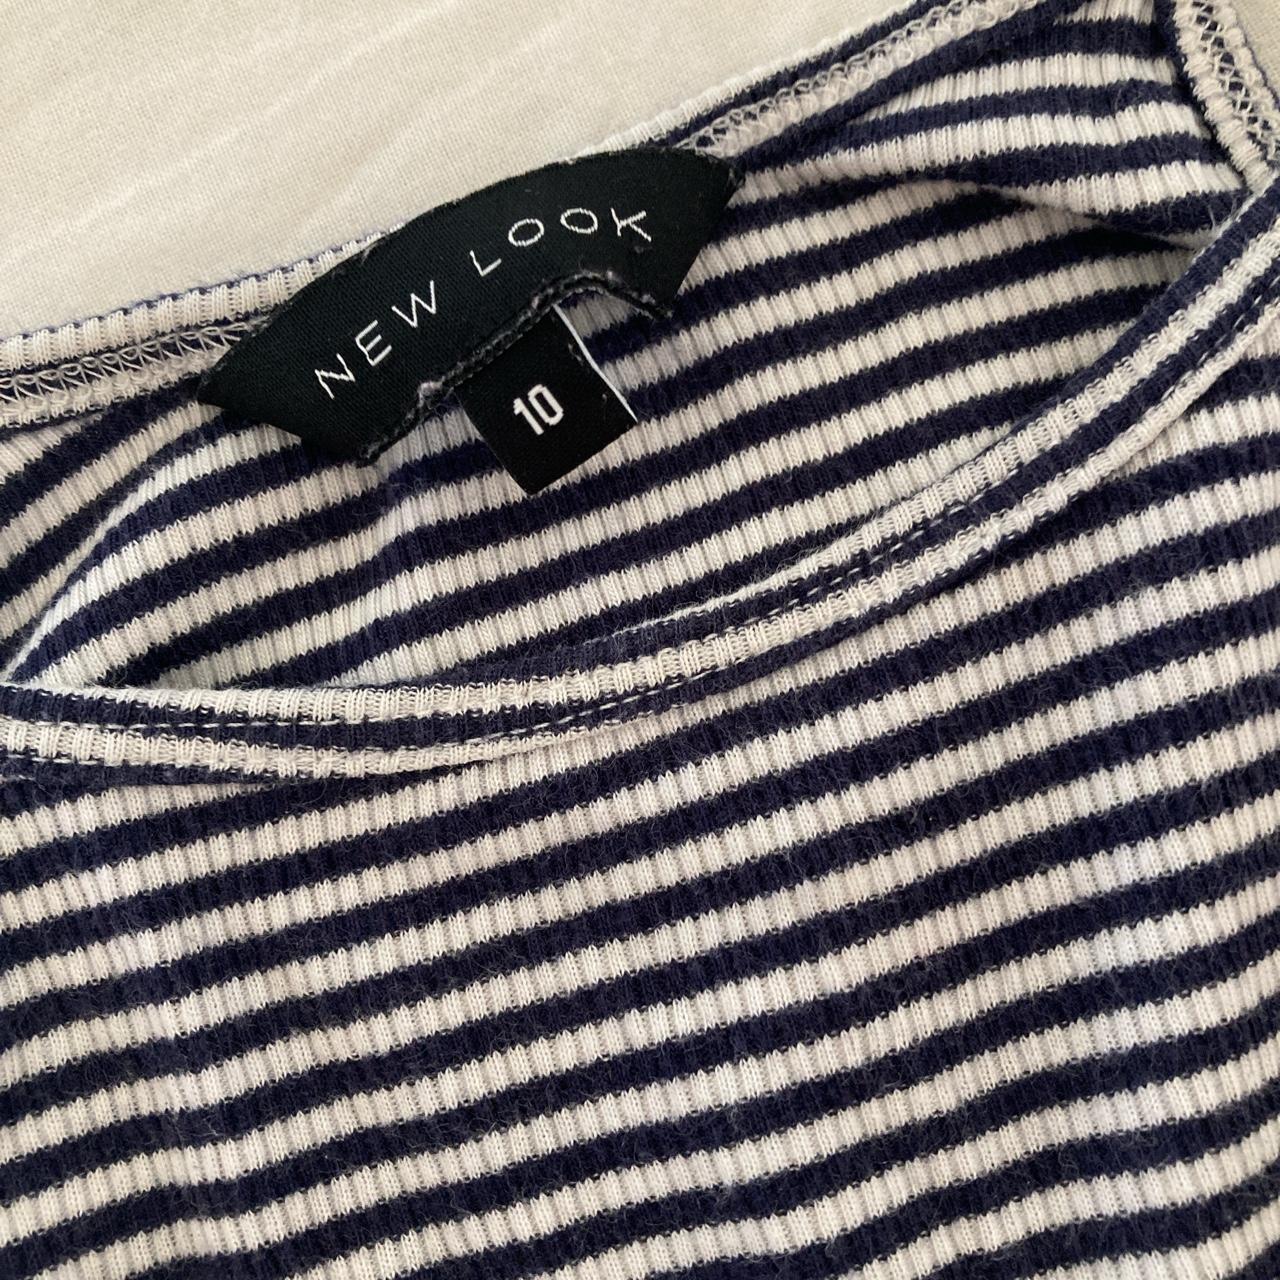 Striped blue and white crop top size 10 but fits... - Depop